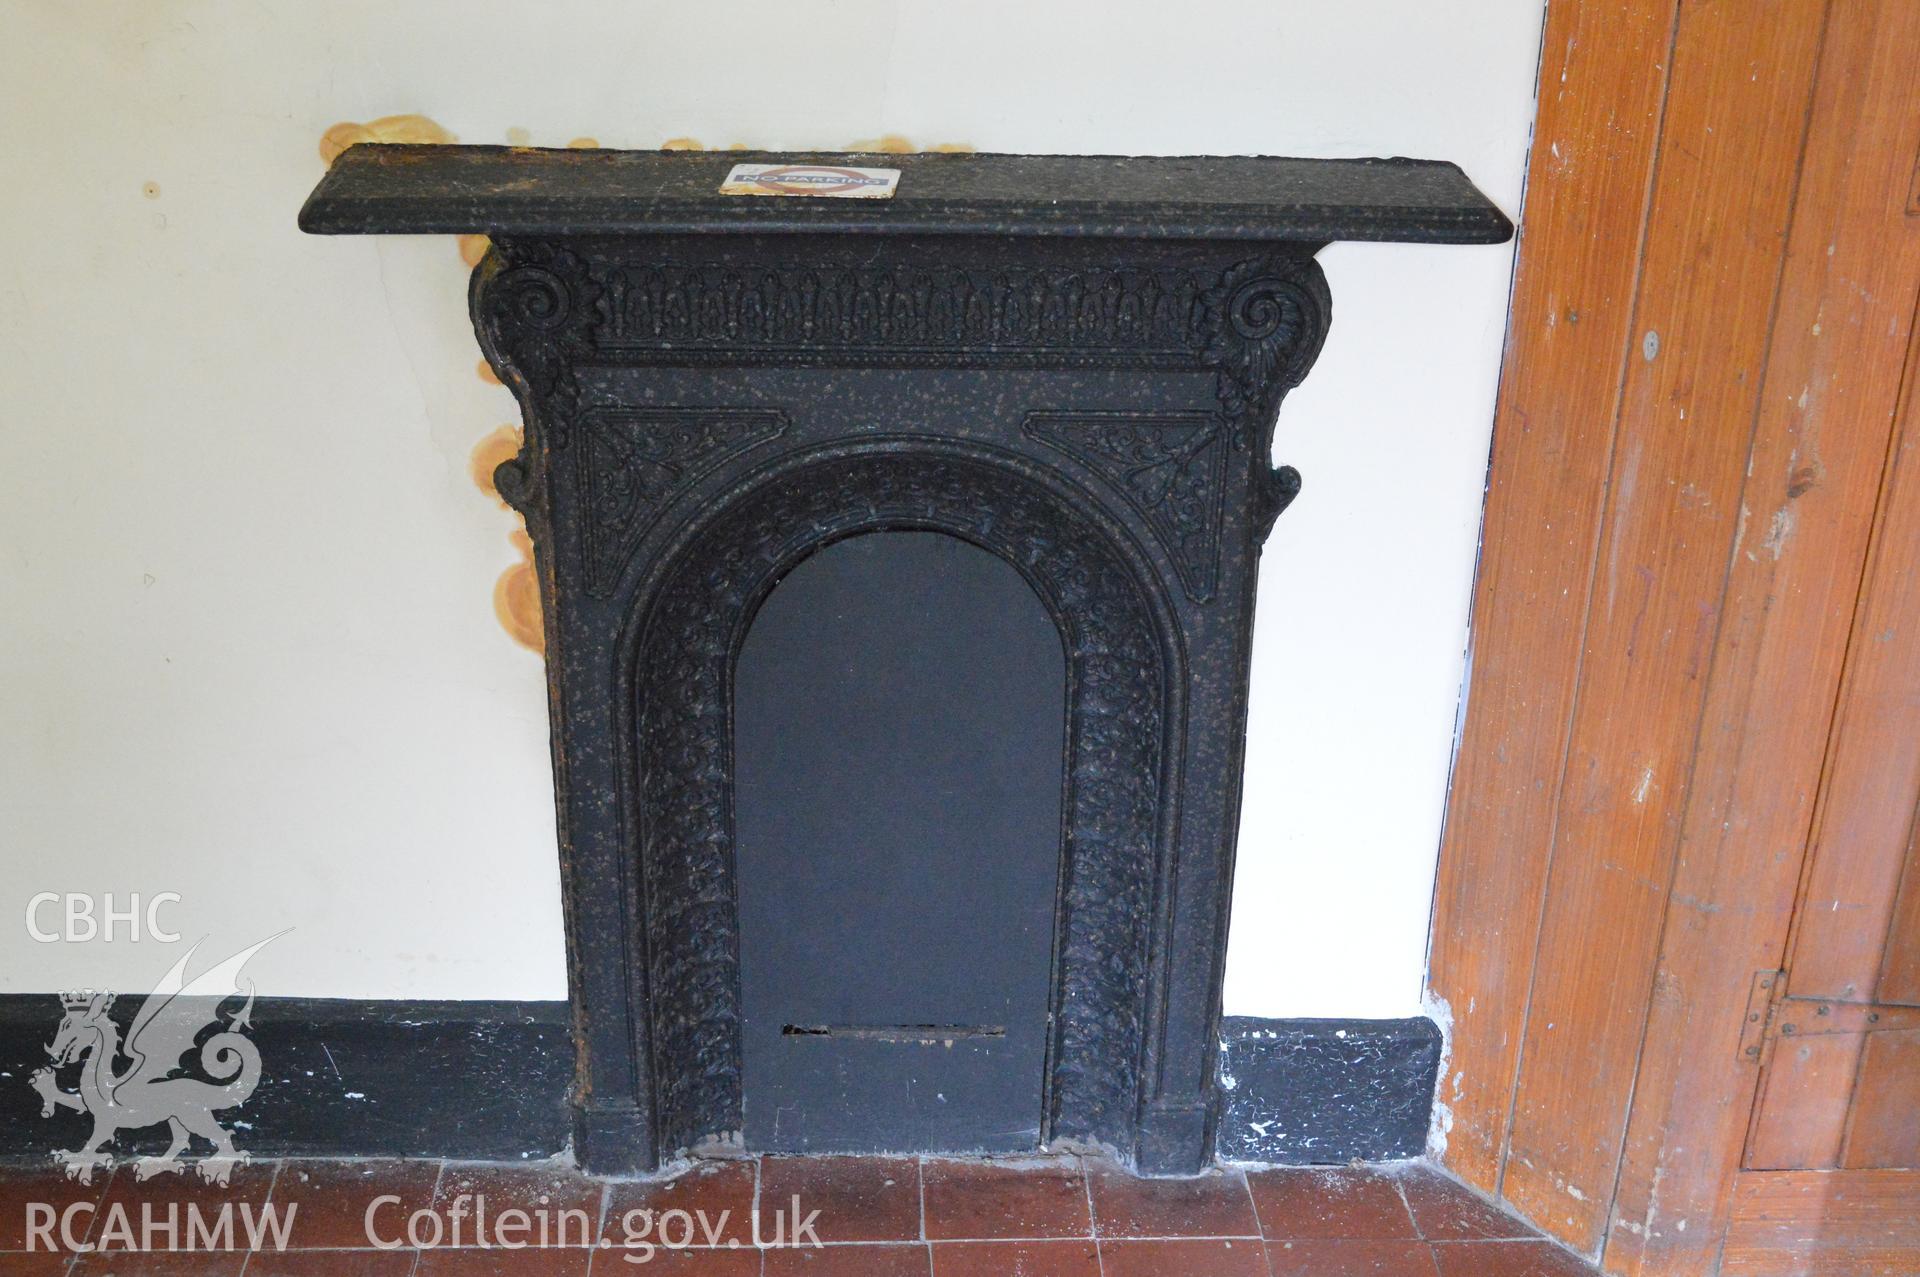 Internal view of the kitchen fireplace. Digital colour photograph taken during CPAT Project 2396 at the United Reformed Church in Northop. Prepared by Clwyd Powys Archaeological Trust, 2018-2019.